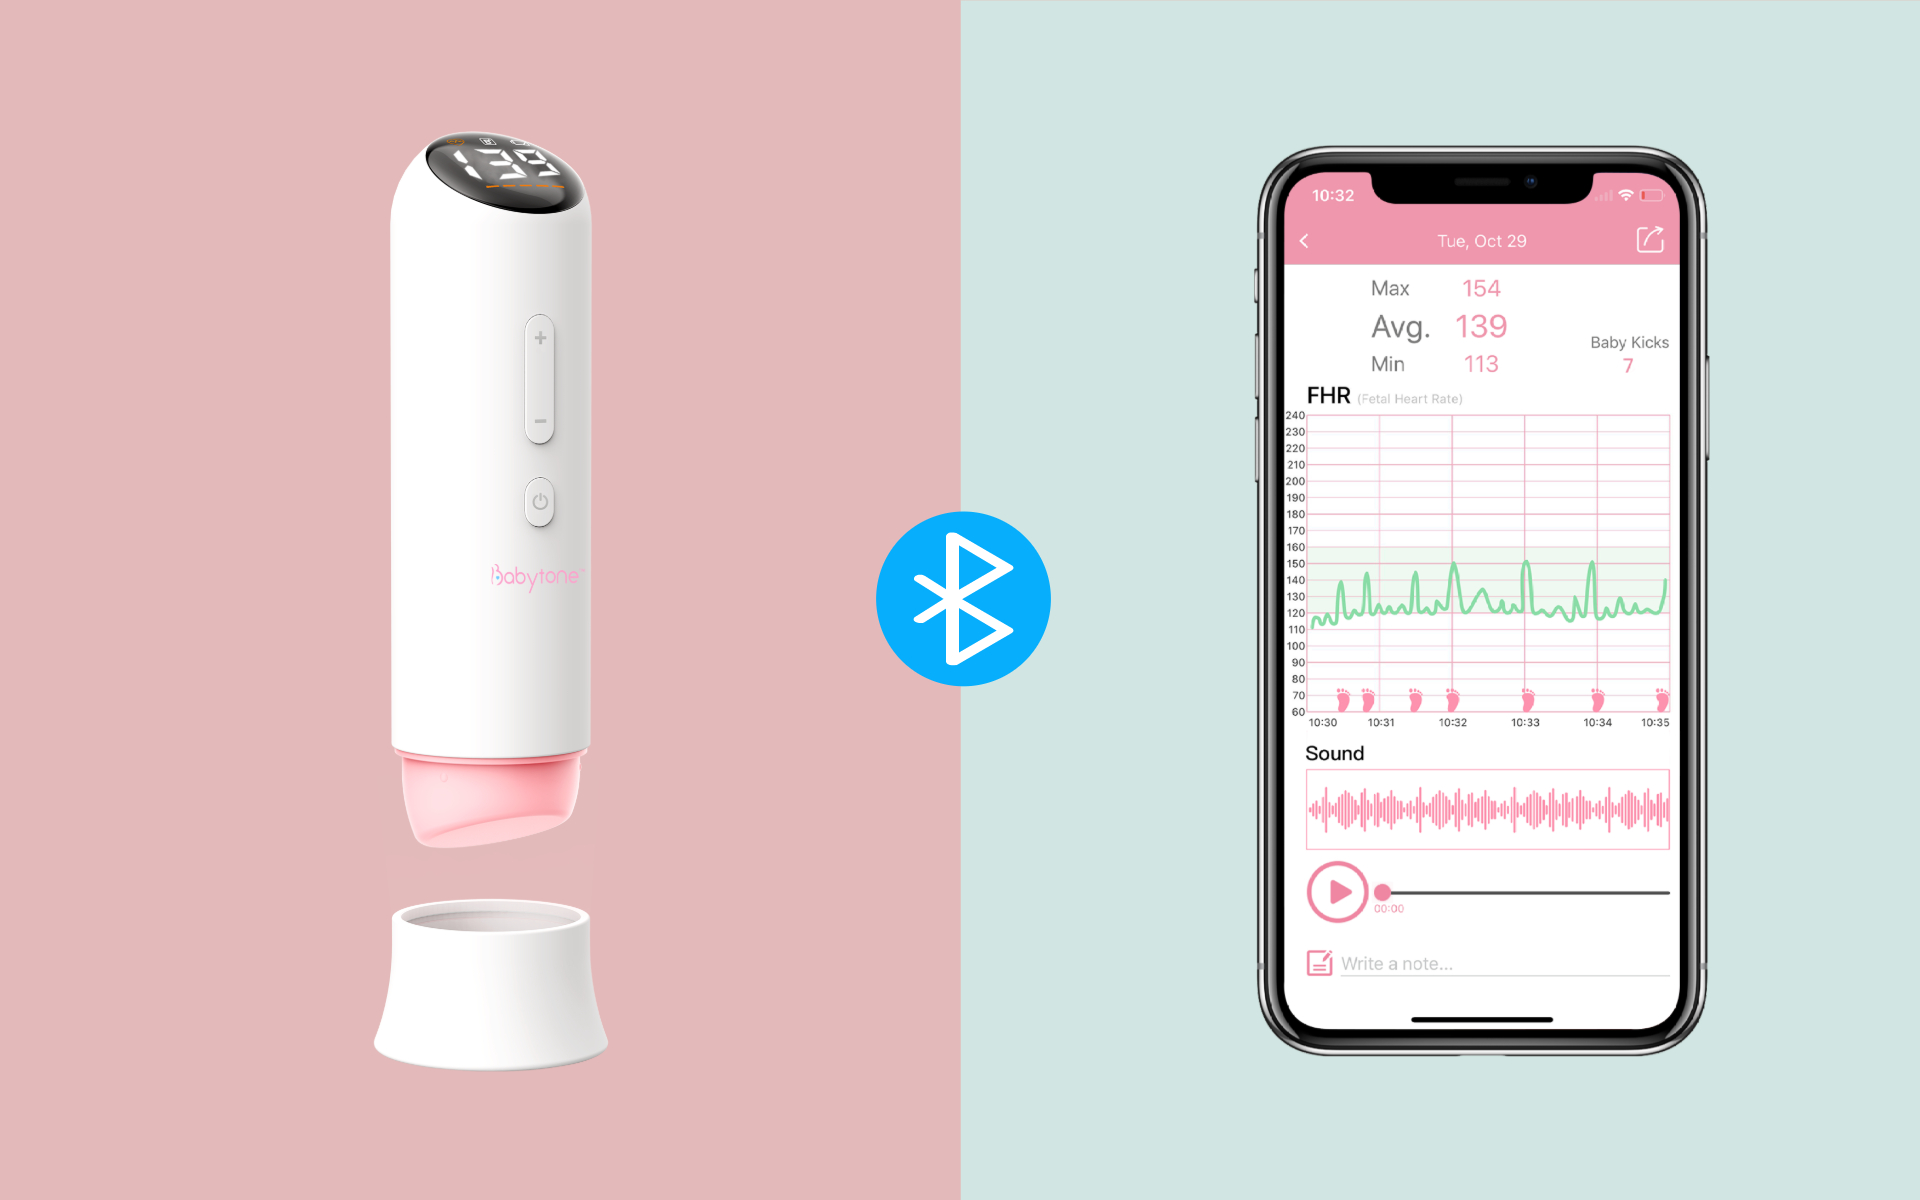 connect the fetal heart monitor to the APP via Bluetooth